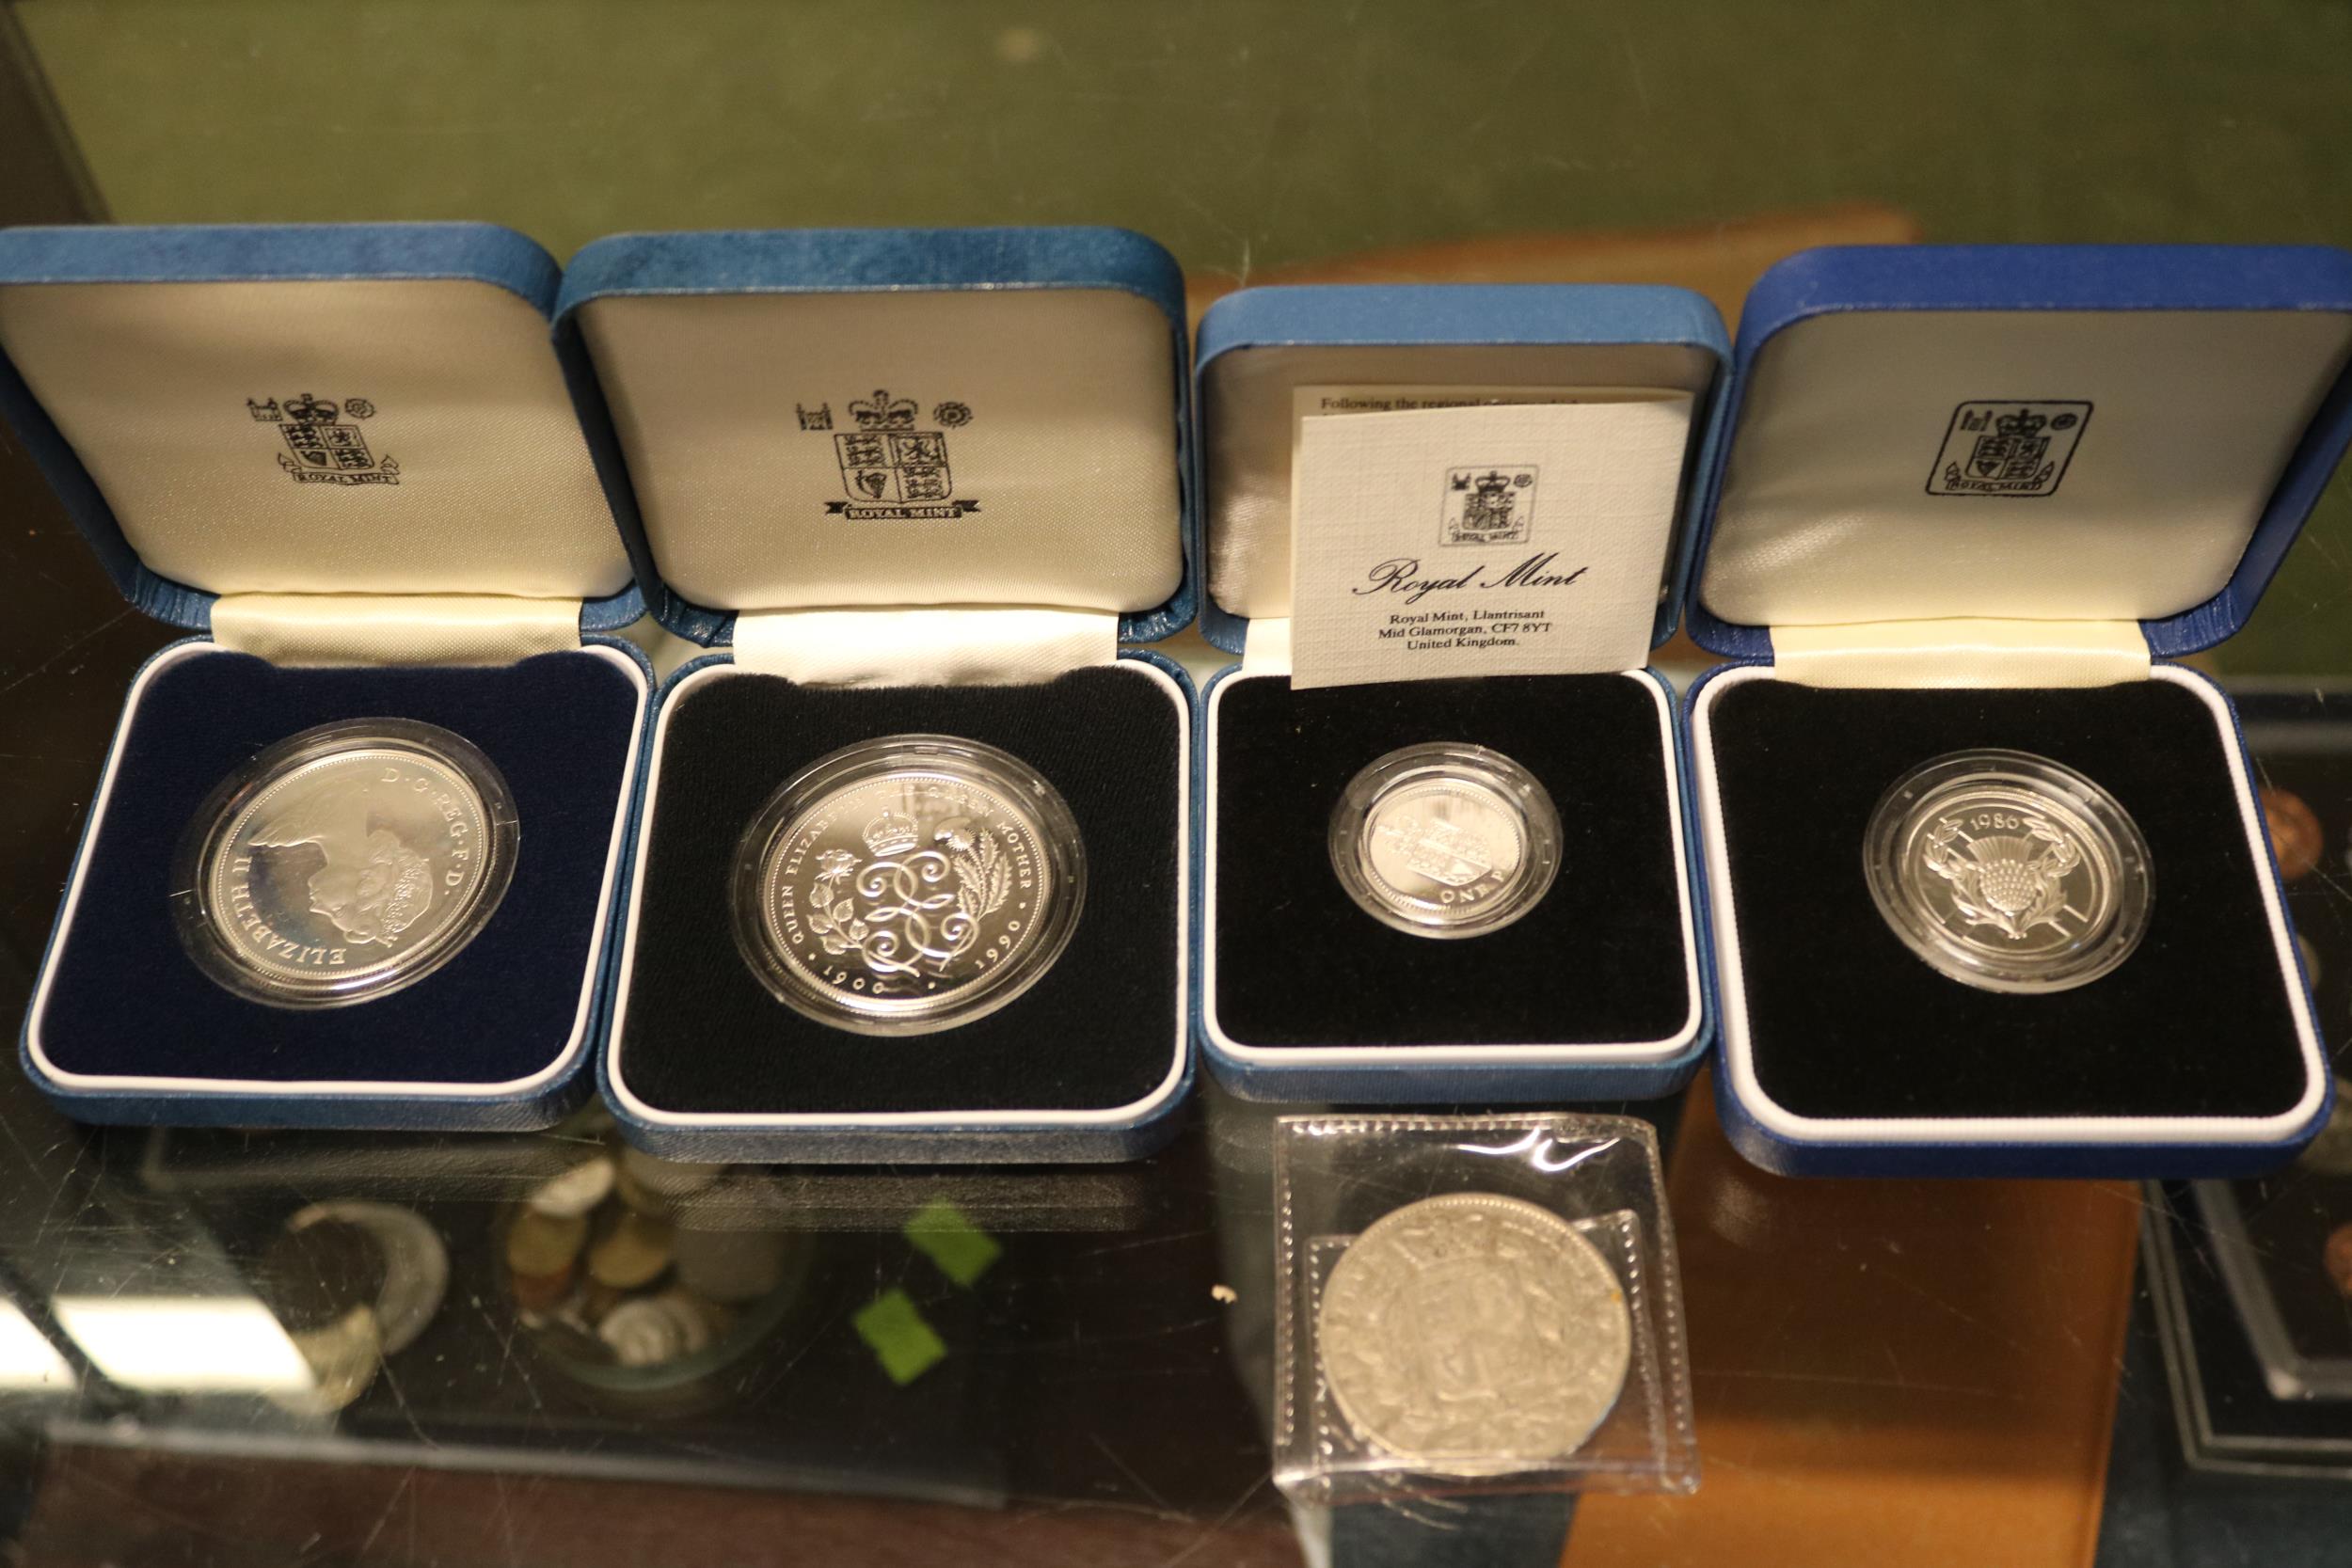 4 Boxed Silver Proof Royal Mint Coins to include 1988 £1, 1986 £2 Coin, 1990 £5, 1981 Prince of